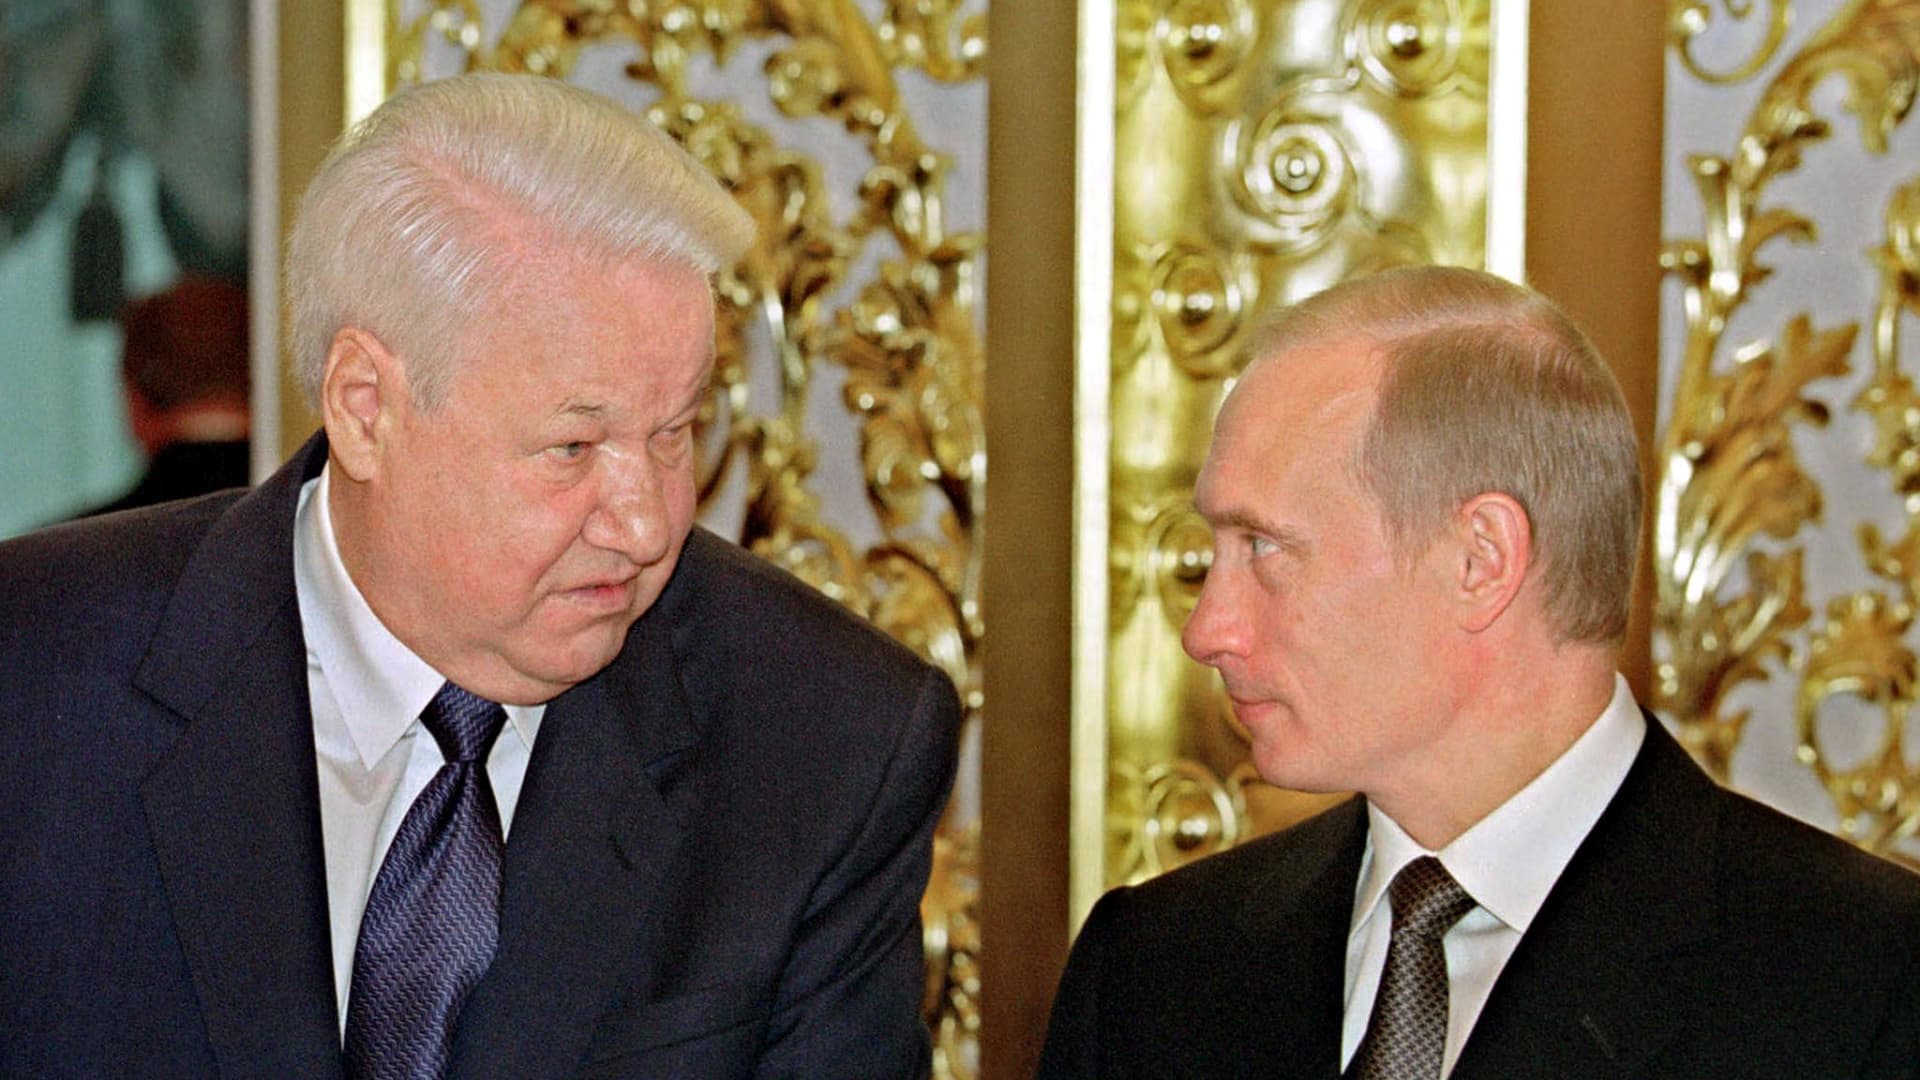 Russian President Vladimir Putin chats with the first President of Russia, Boris Yeltsin, during the State reception in Kremlin, devoted to the Day of Declaration of Sovereignty in Moscow, 12 June 2001.